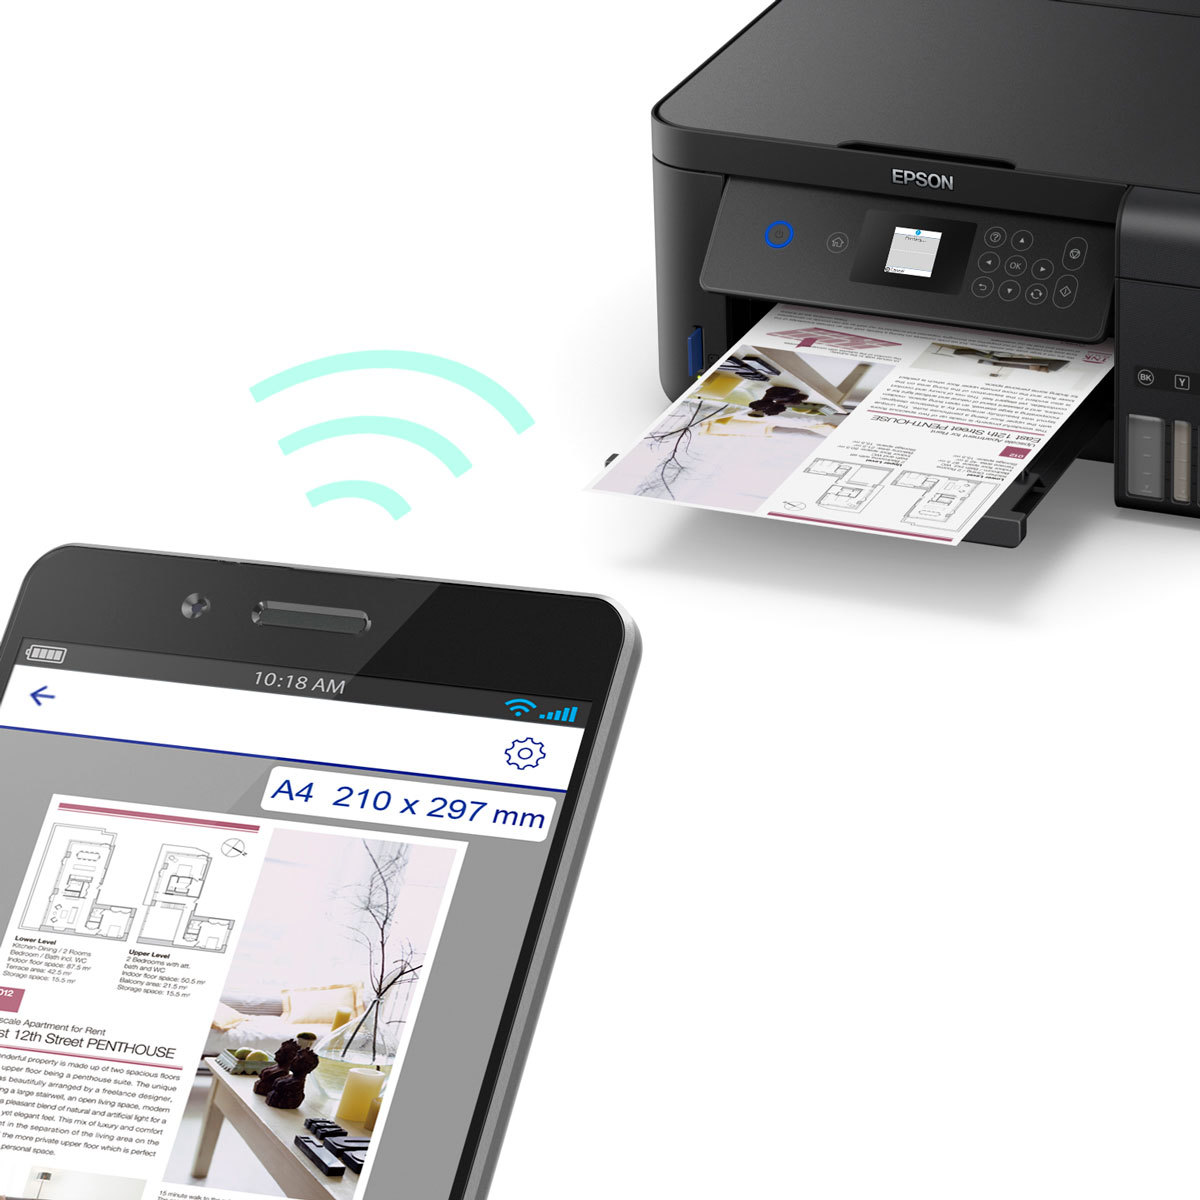 Buy Epson EcoTank ET-2750B Unlimited All in One Wireless Printer at costco.co.uk